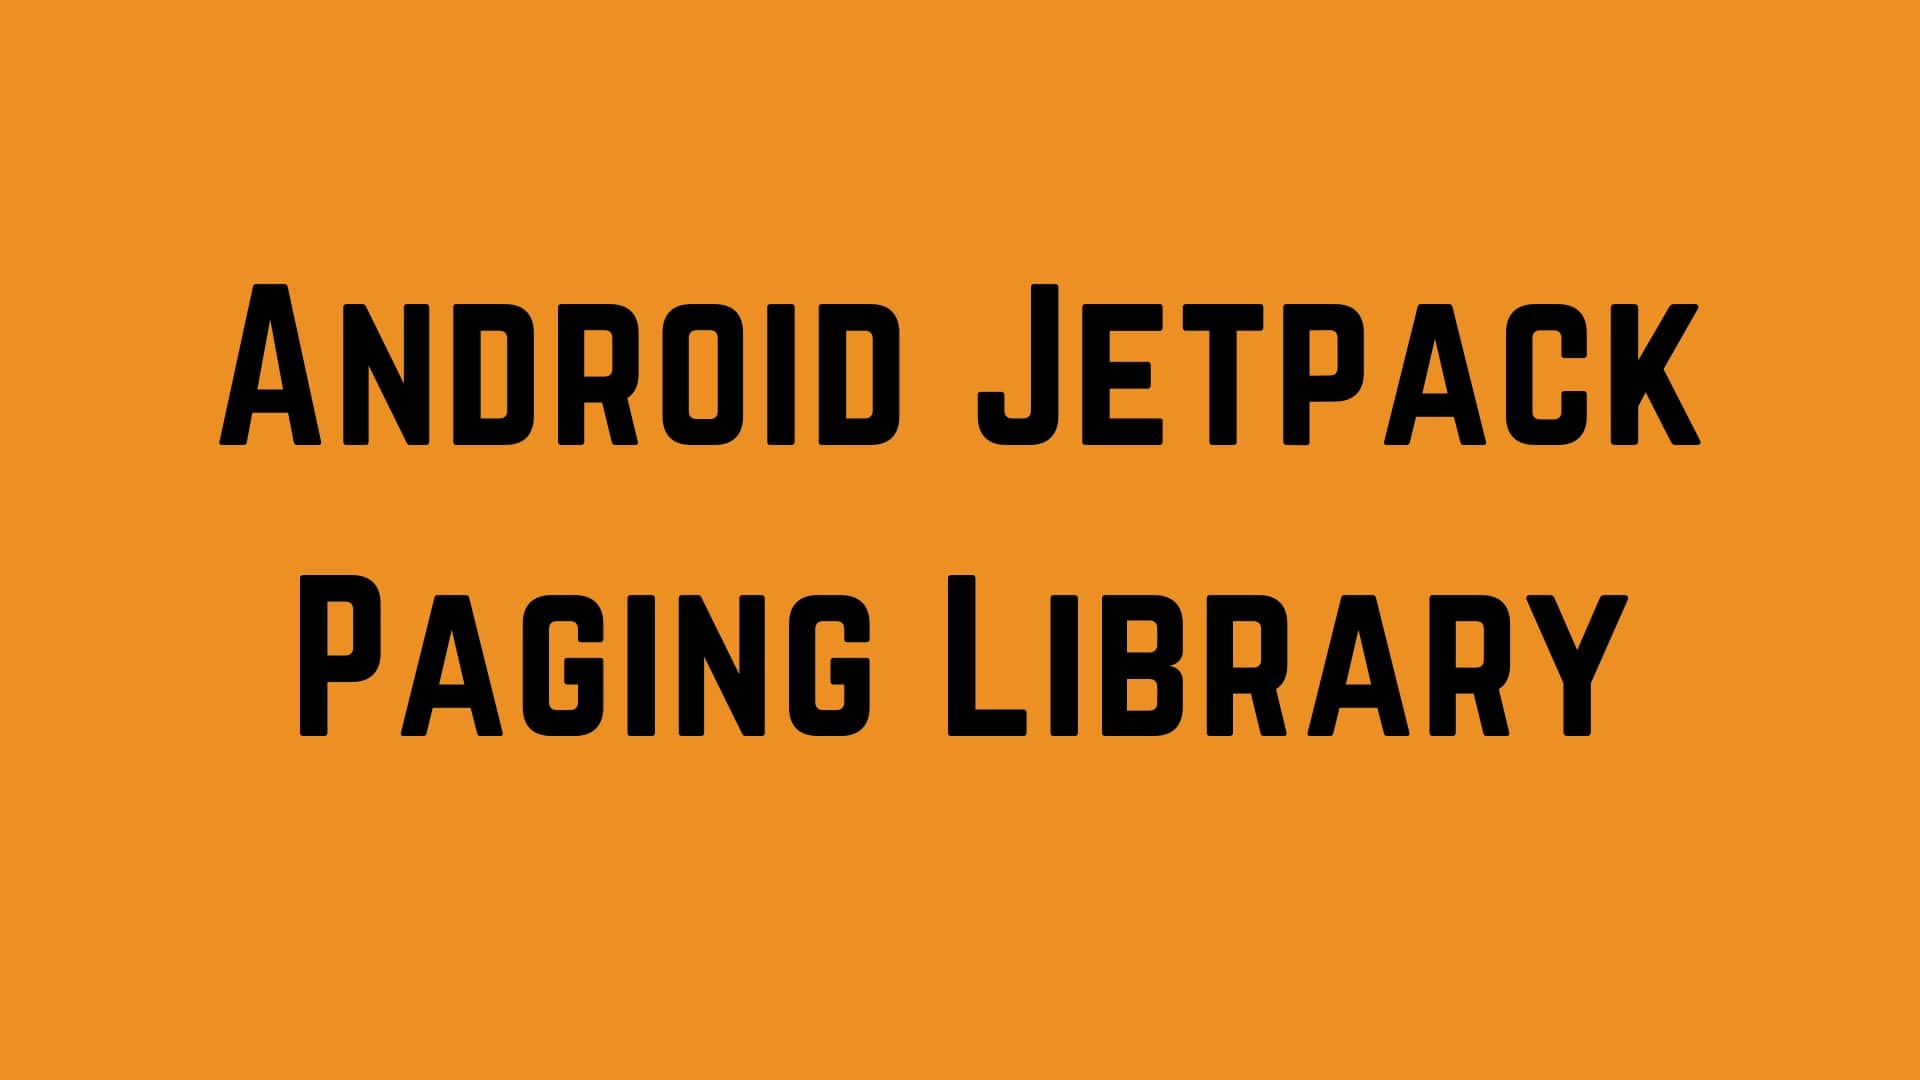 Exploring Android Jetpack Paging Library